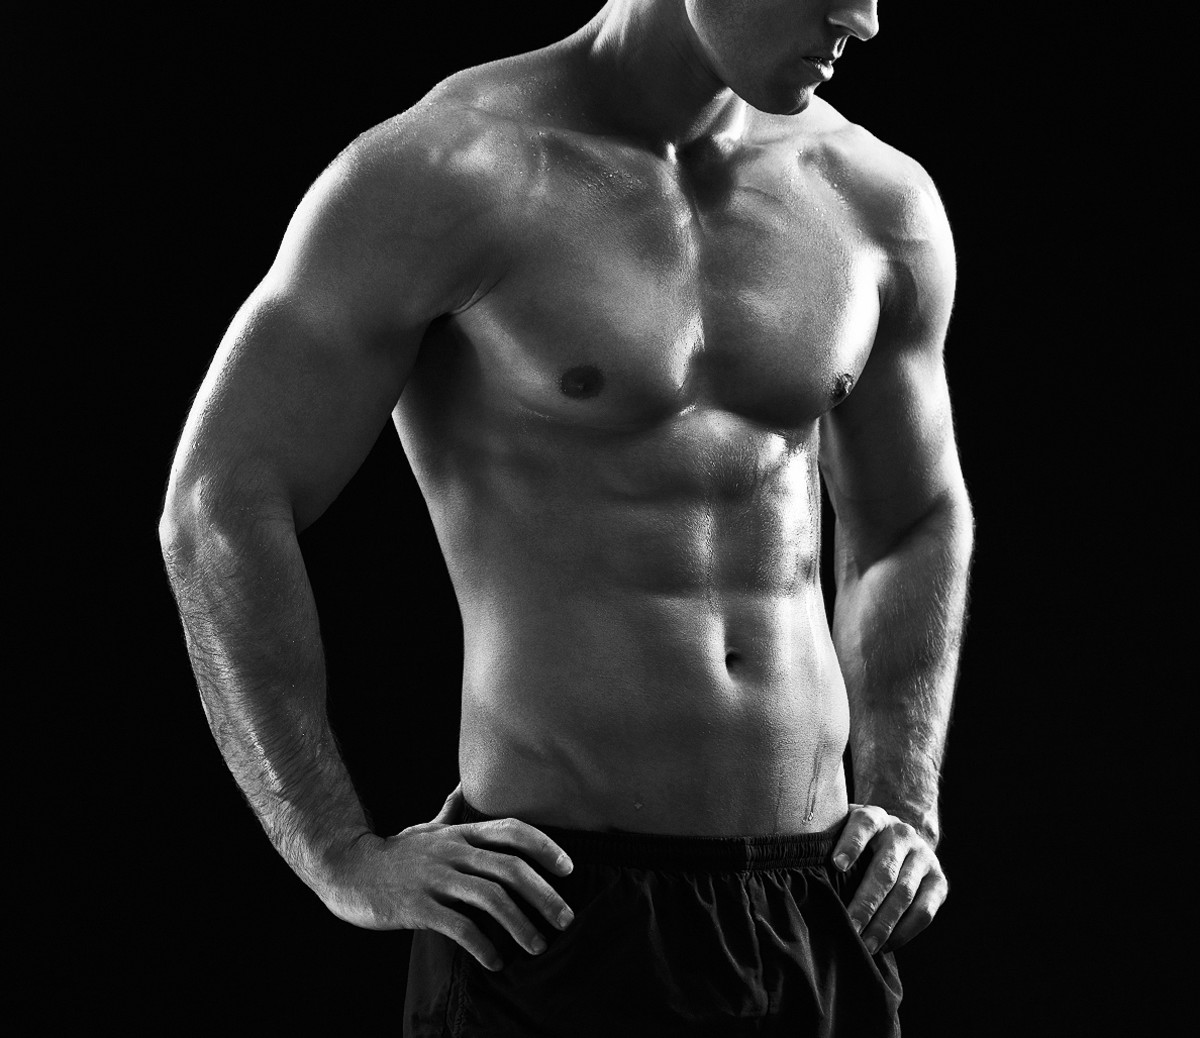 What Is A Good Body Fat Percentage?